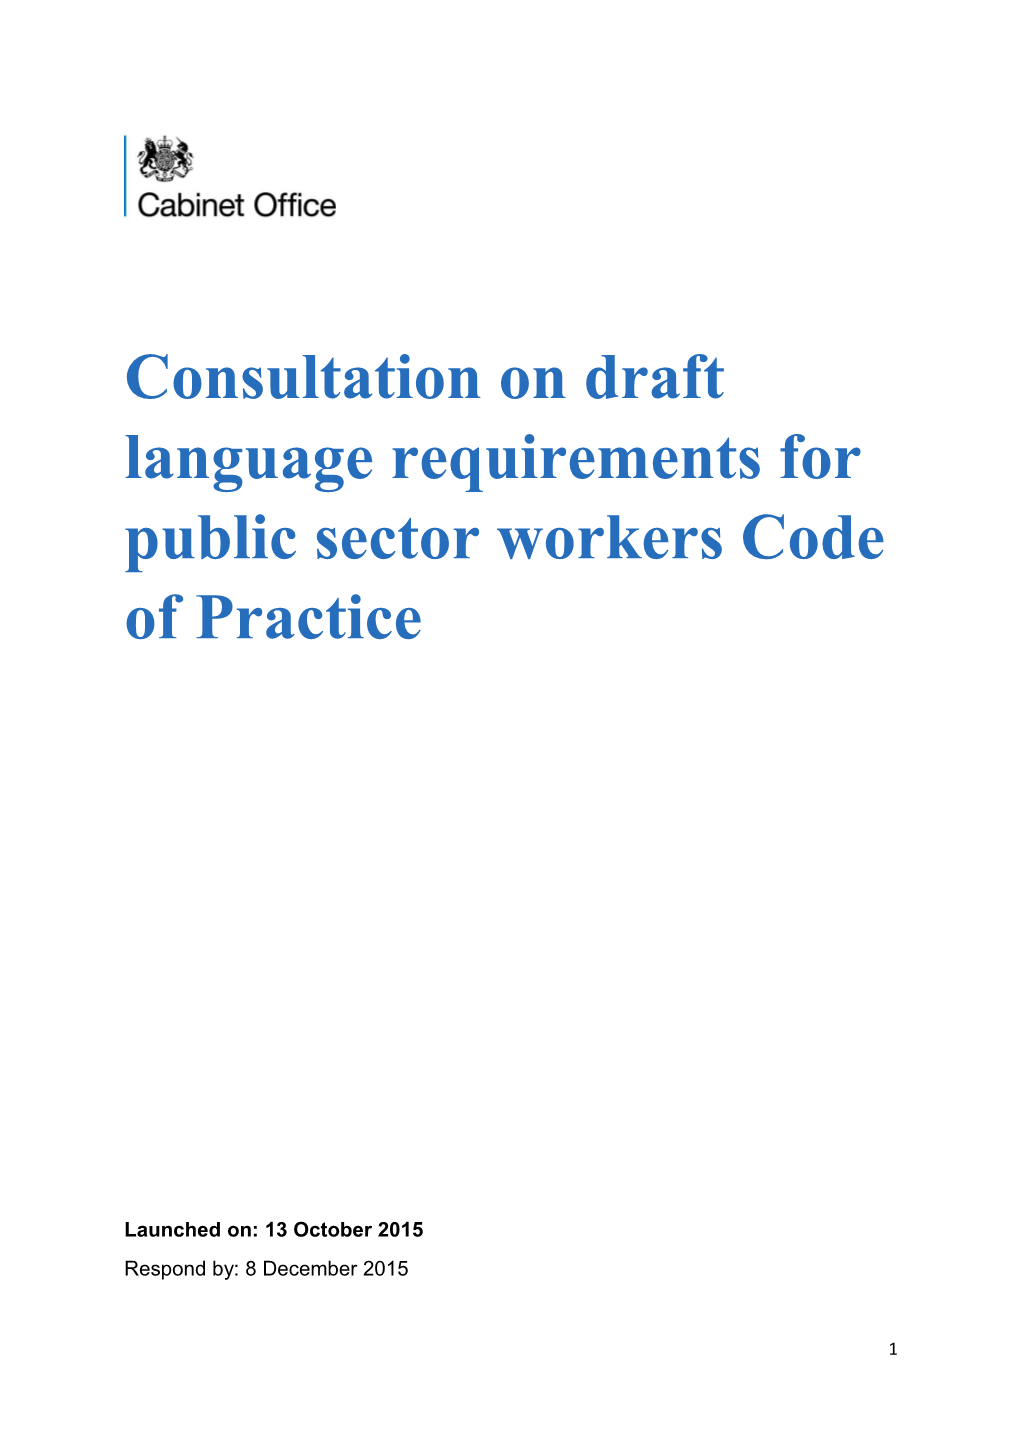 Consultation on Draft Language Requirements for Public Sector Workers Code of Practice